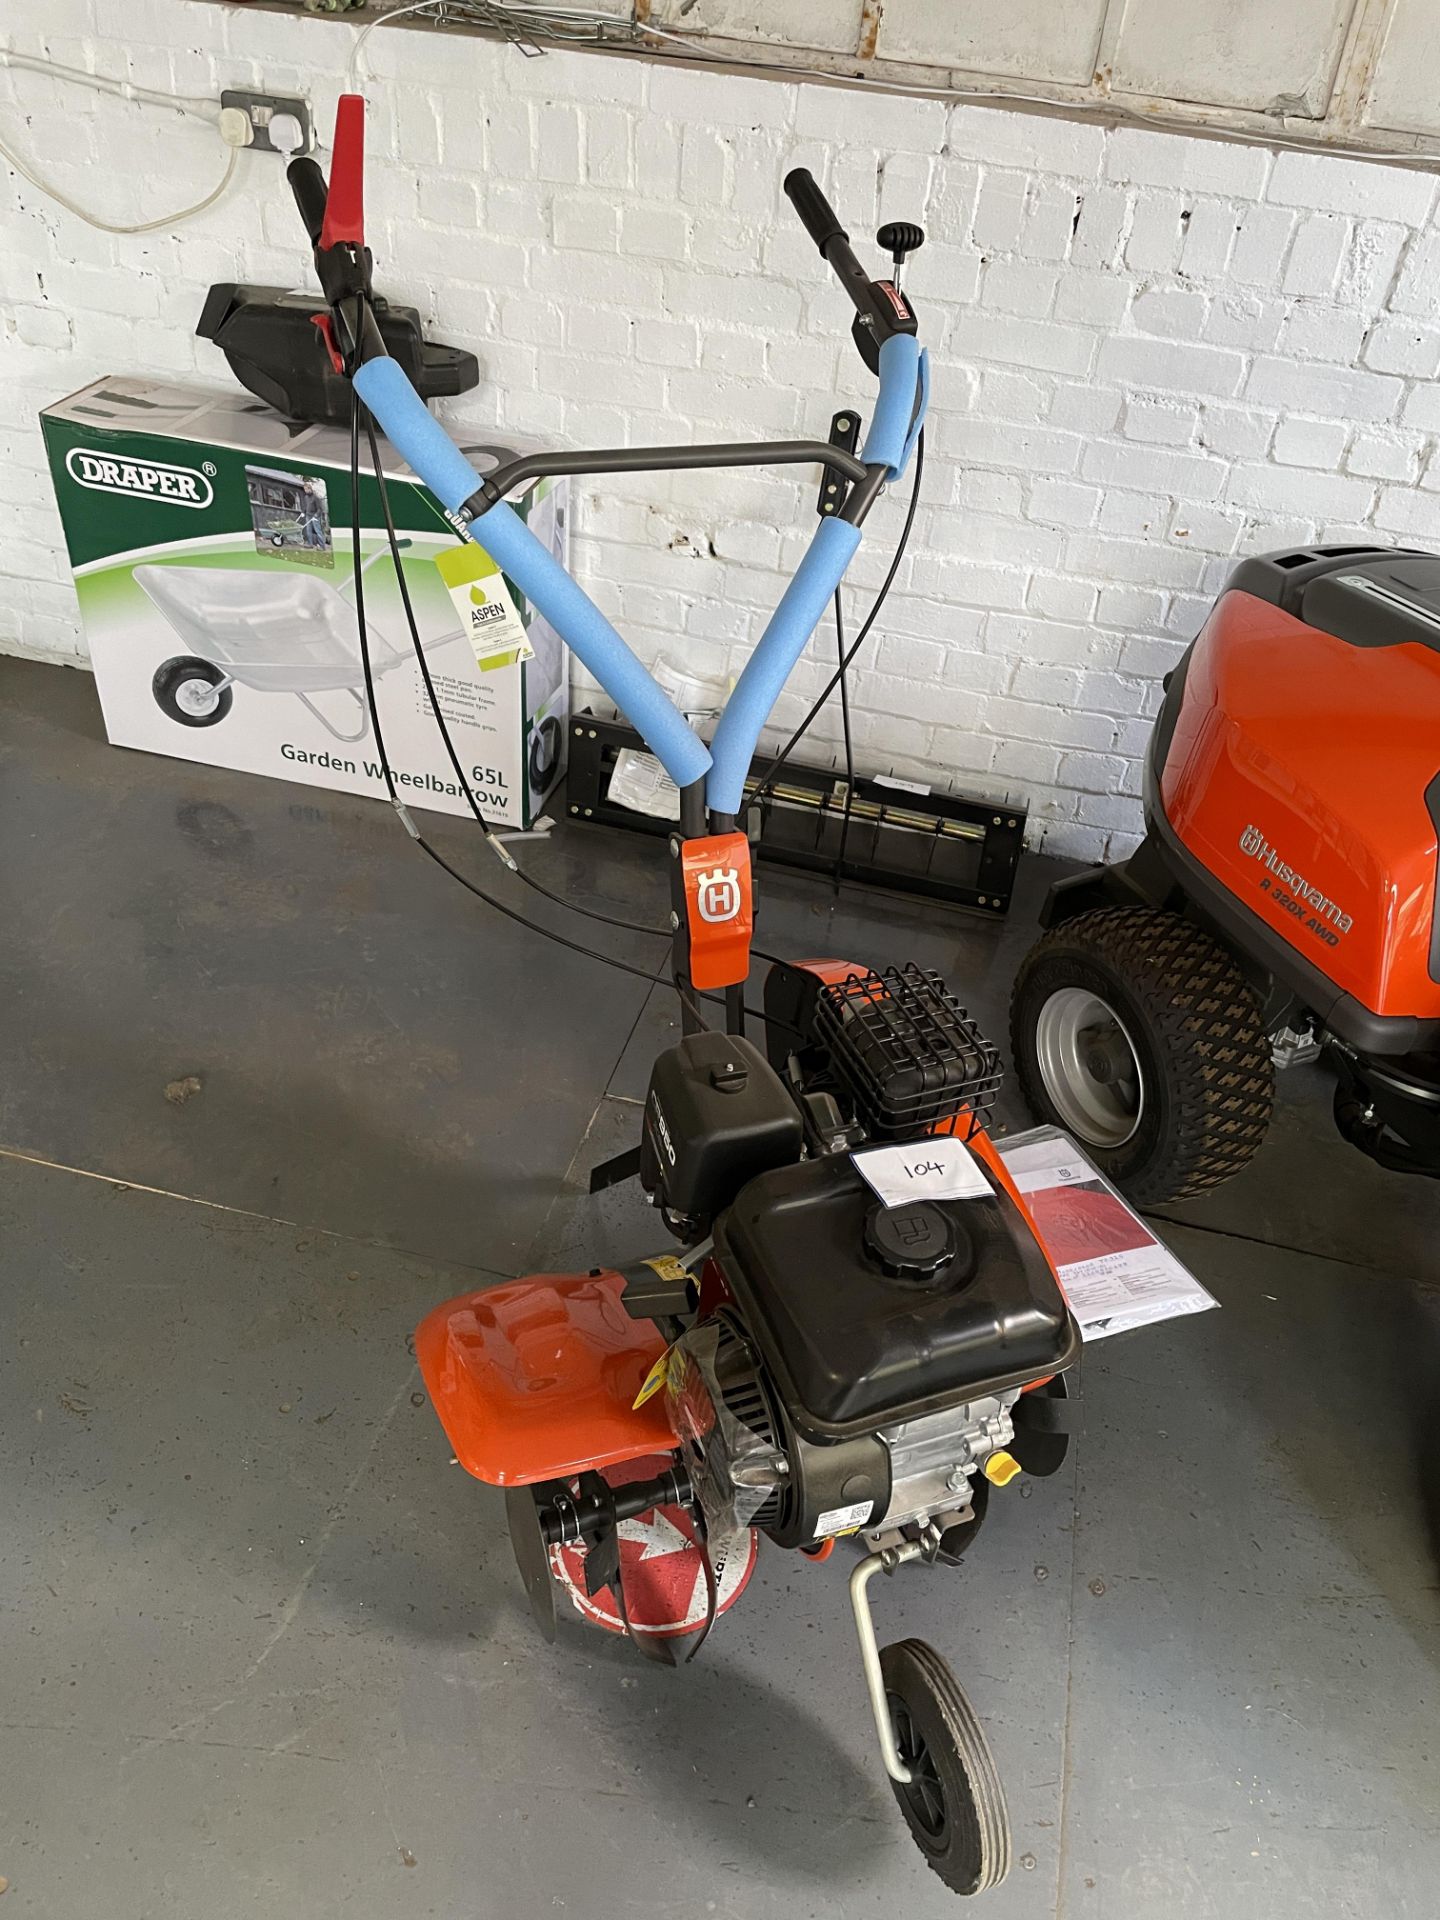 1: Husqvarna TF325 Engine Powered Cultivator Serial No 2205300688 with Briggs and Stratton CR950, 20